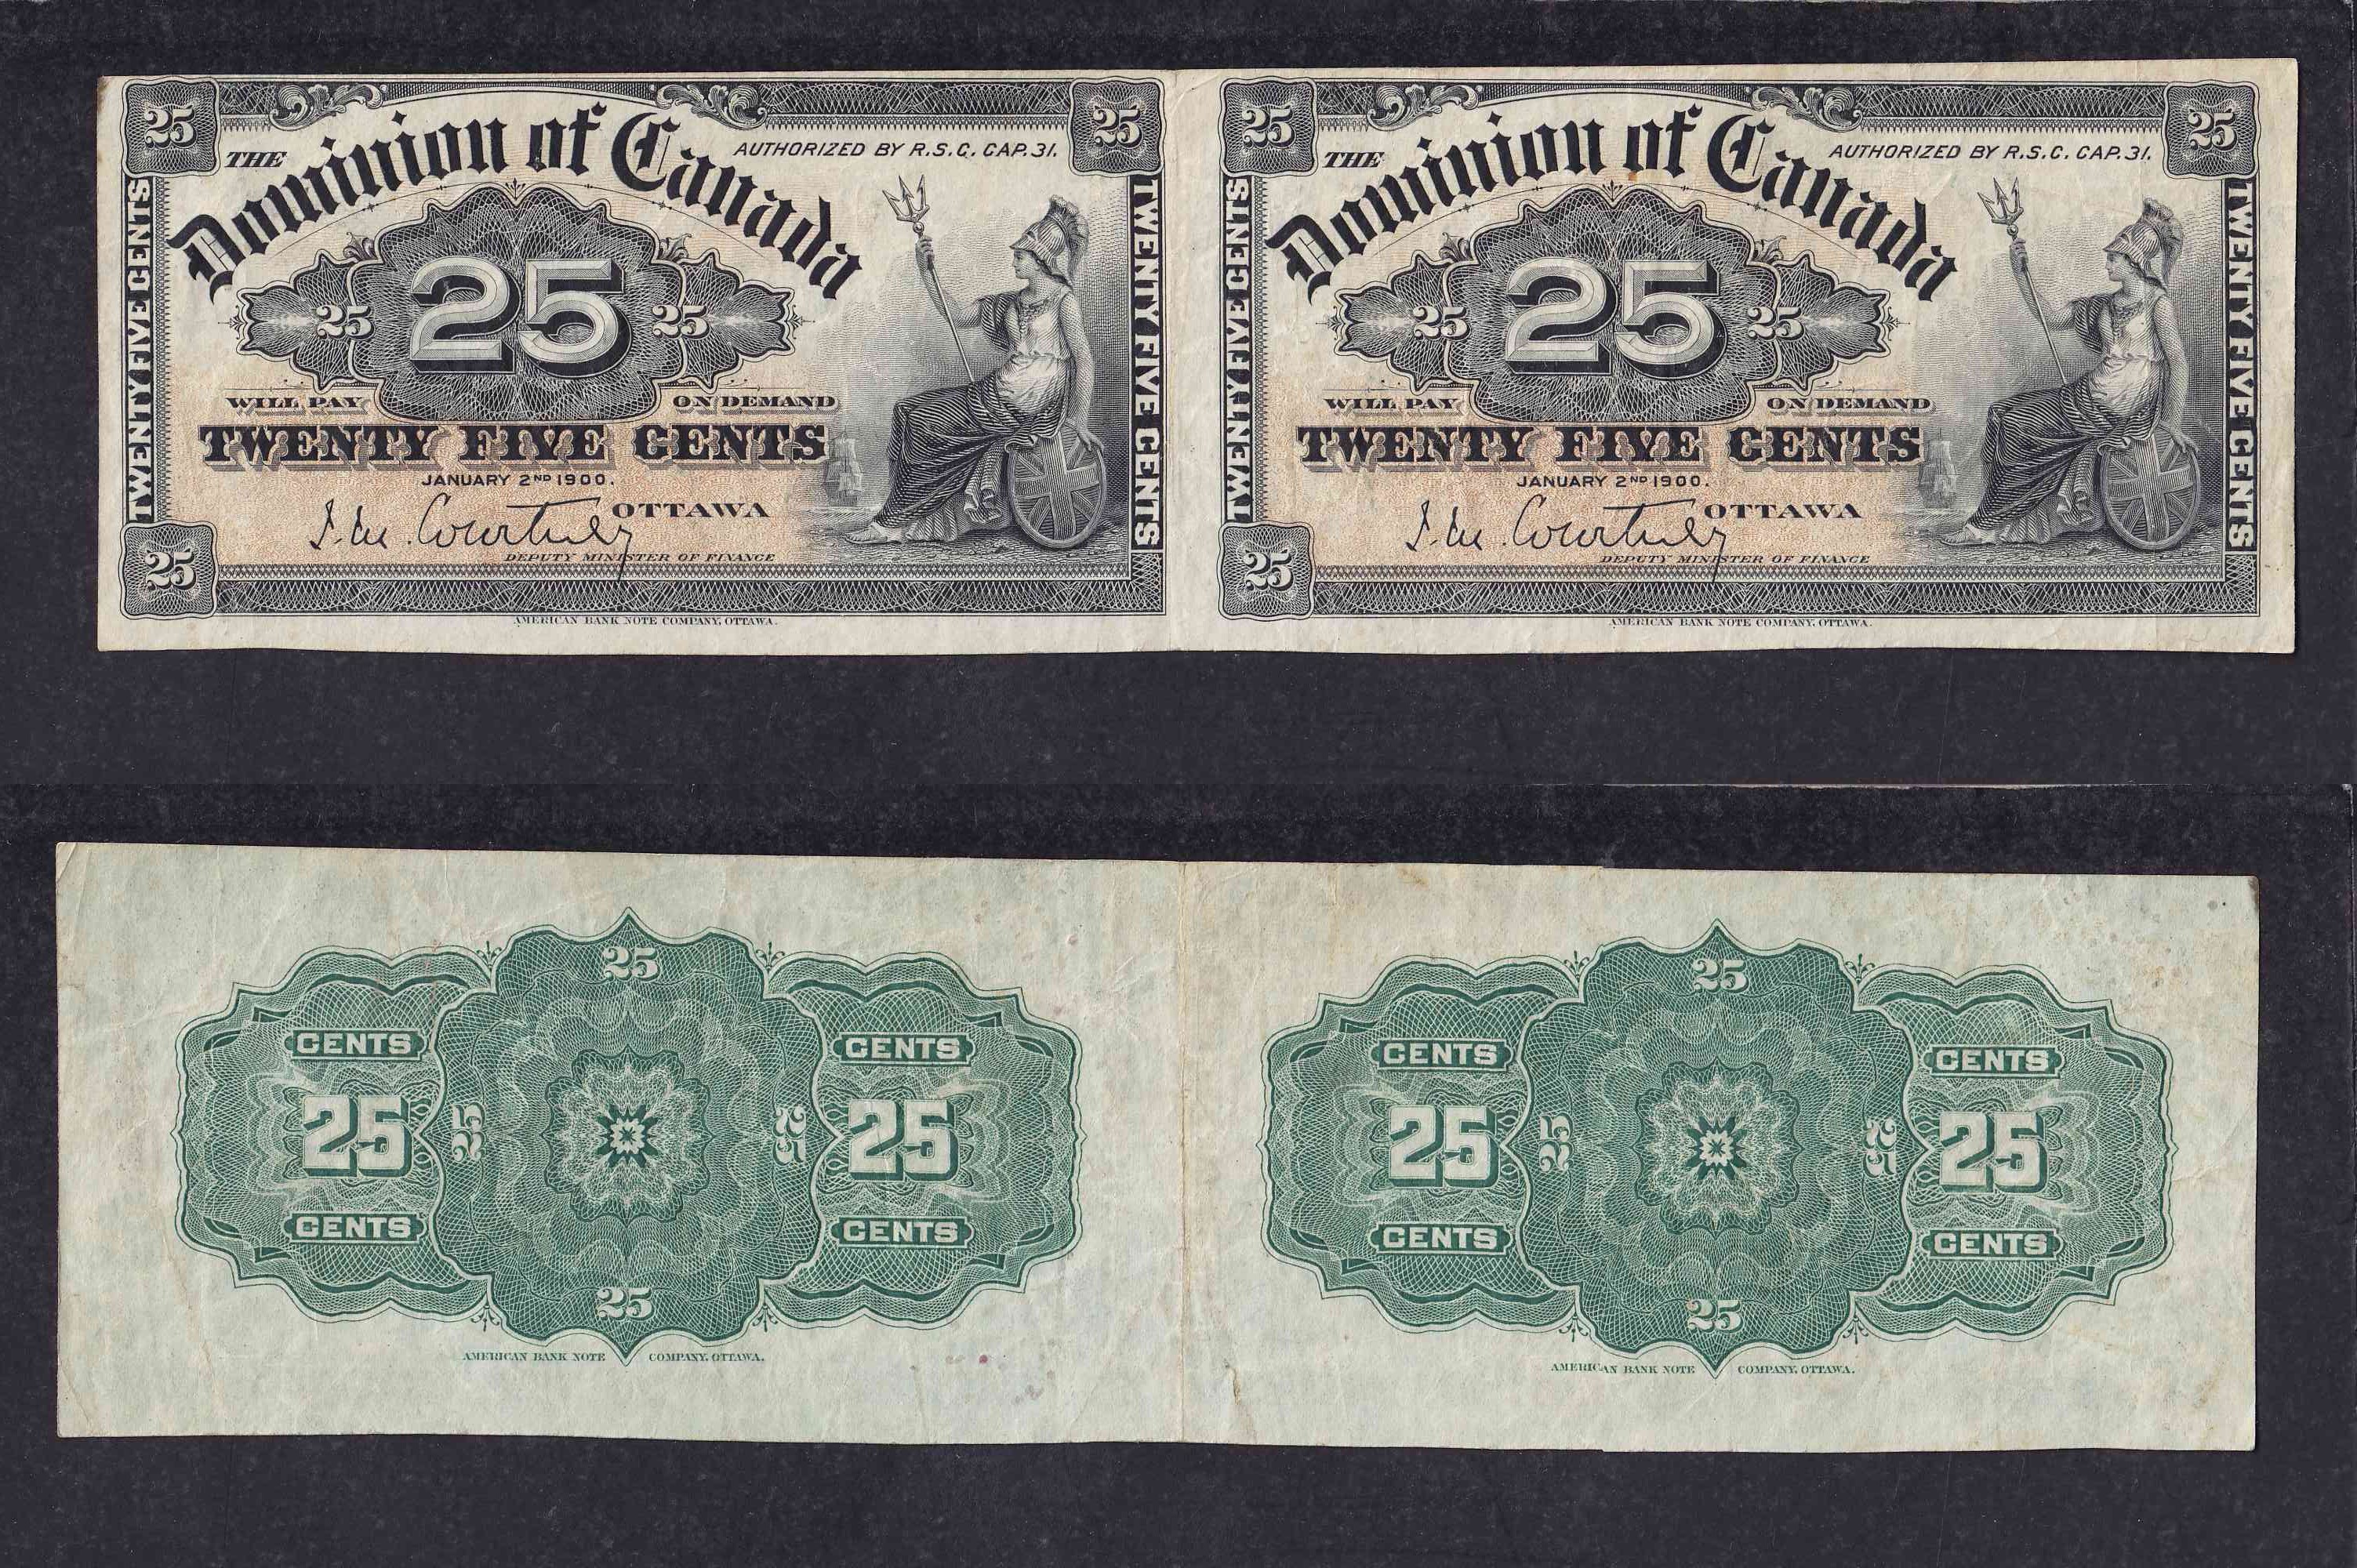 1900 DOMINION OF CANADA 25 CENTS COURTNEY UNCUT PAIR BANK NOTE photo